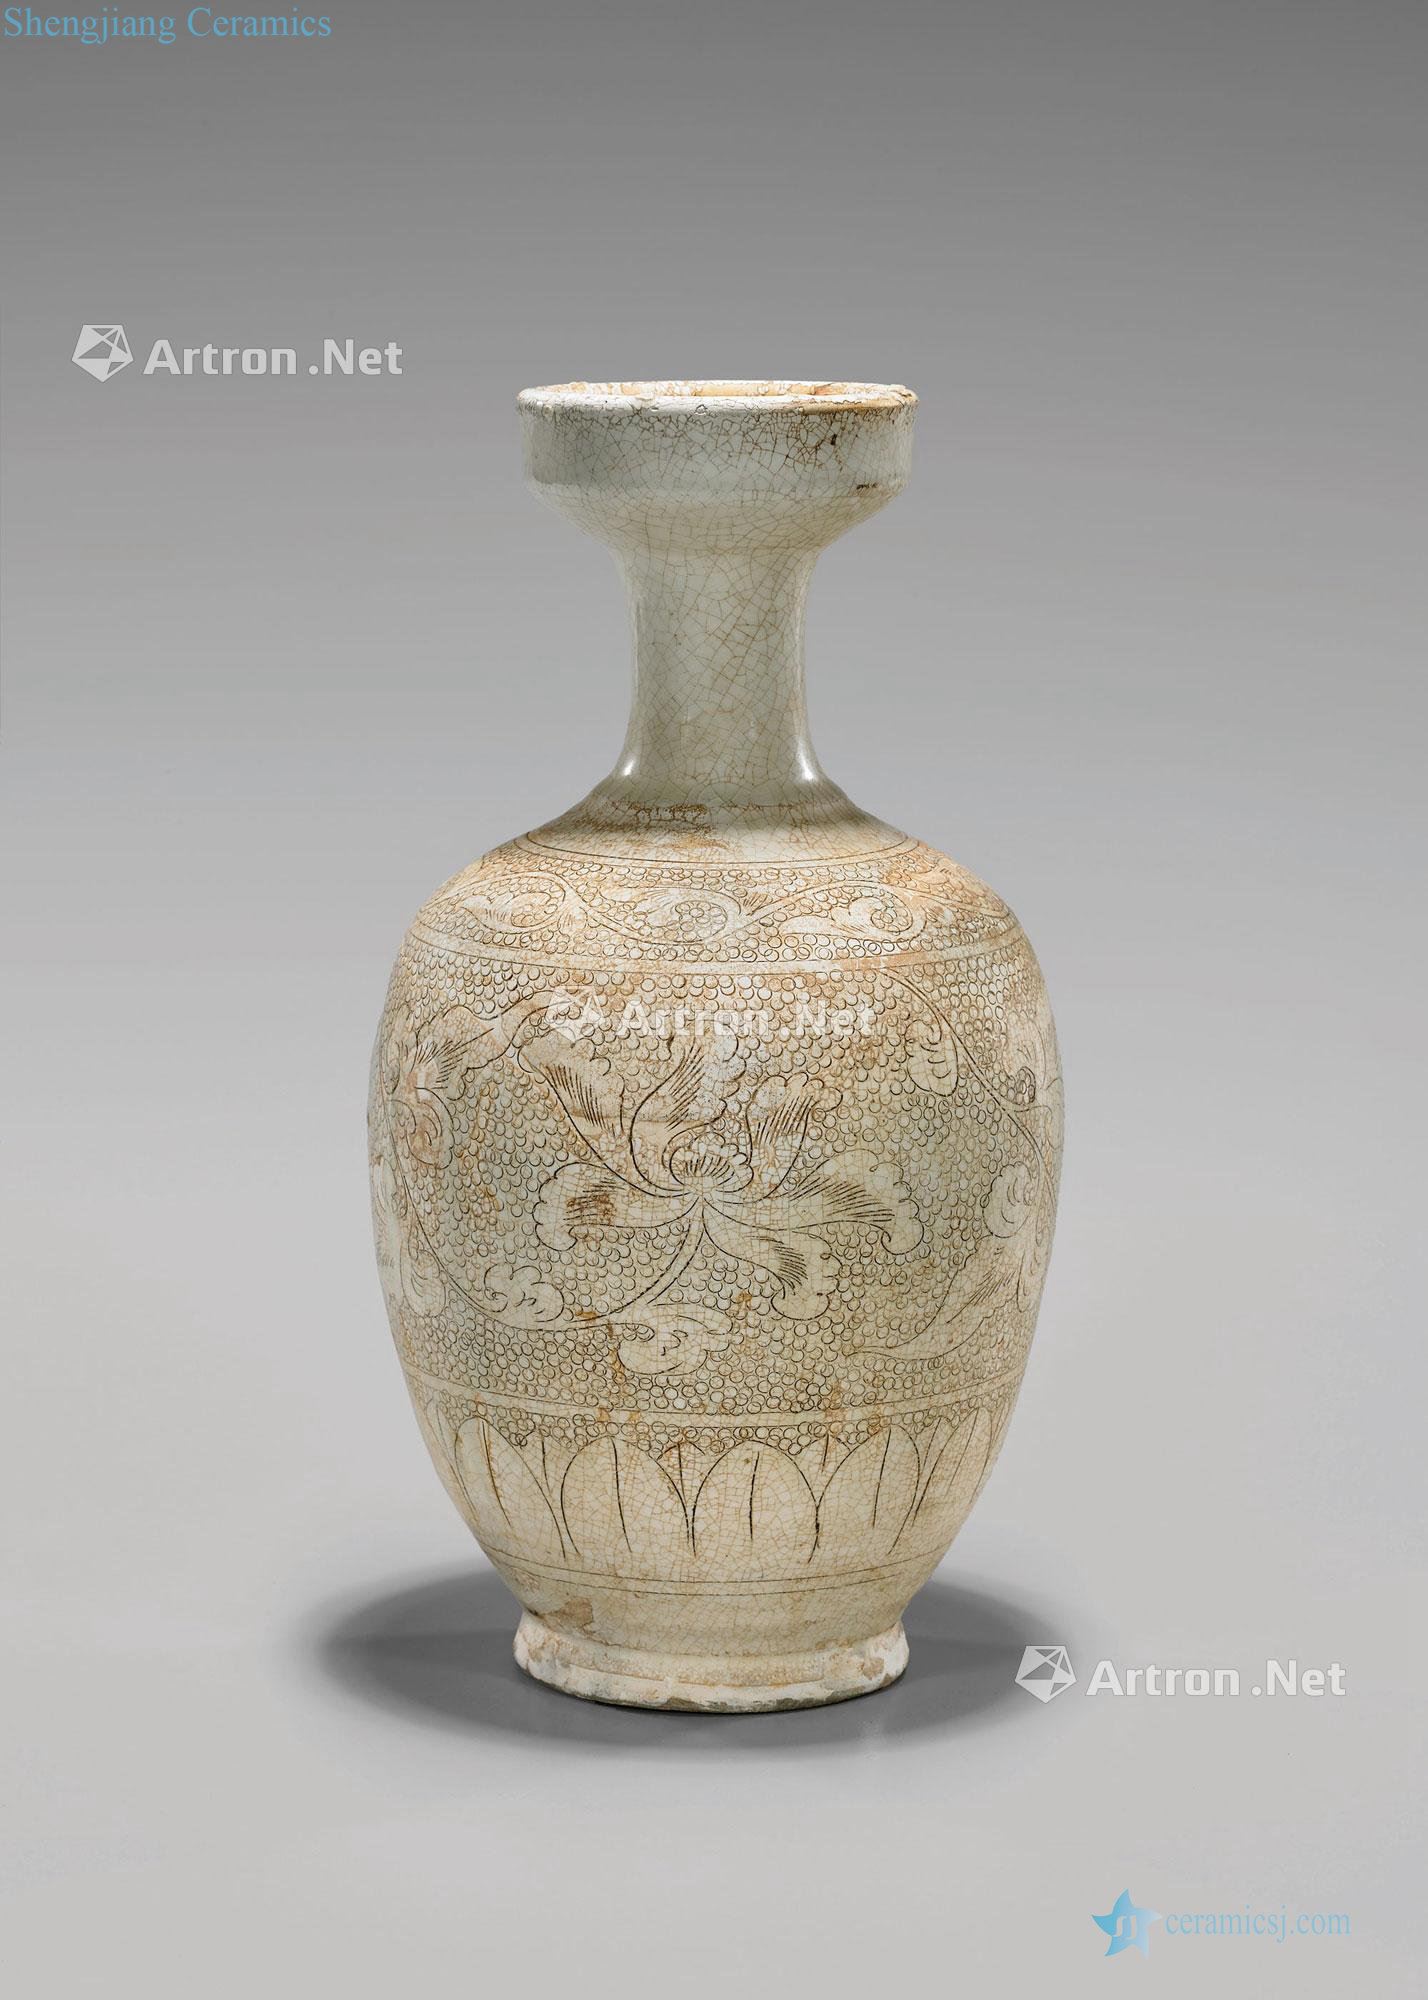 Song cizhou pearl vases